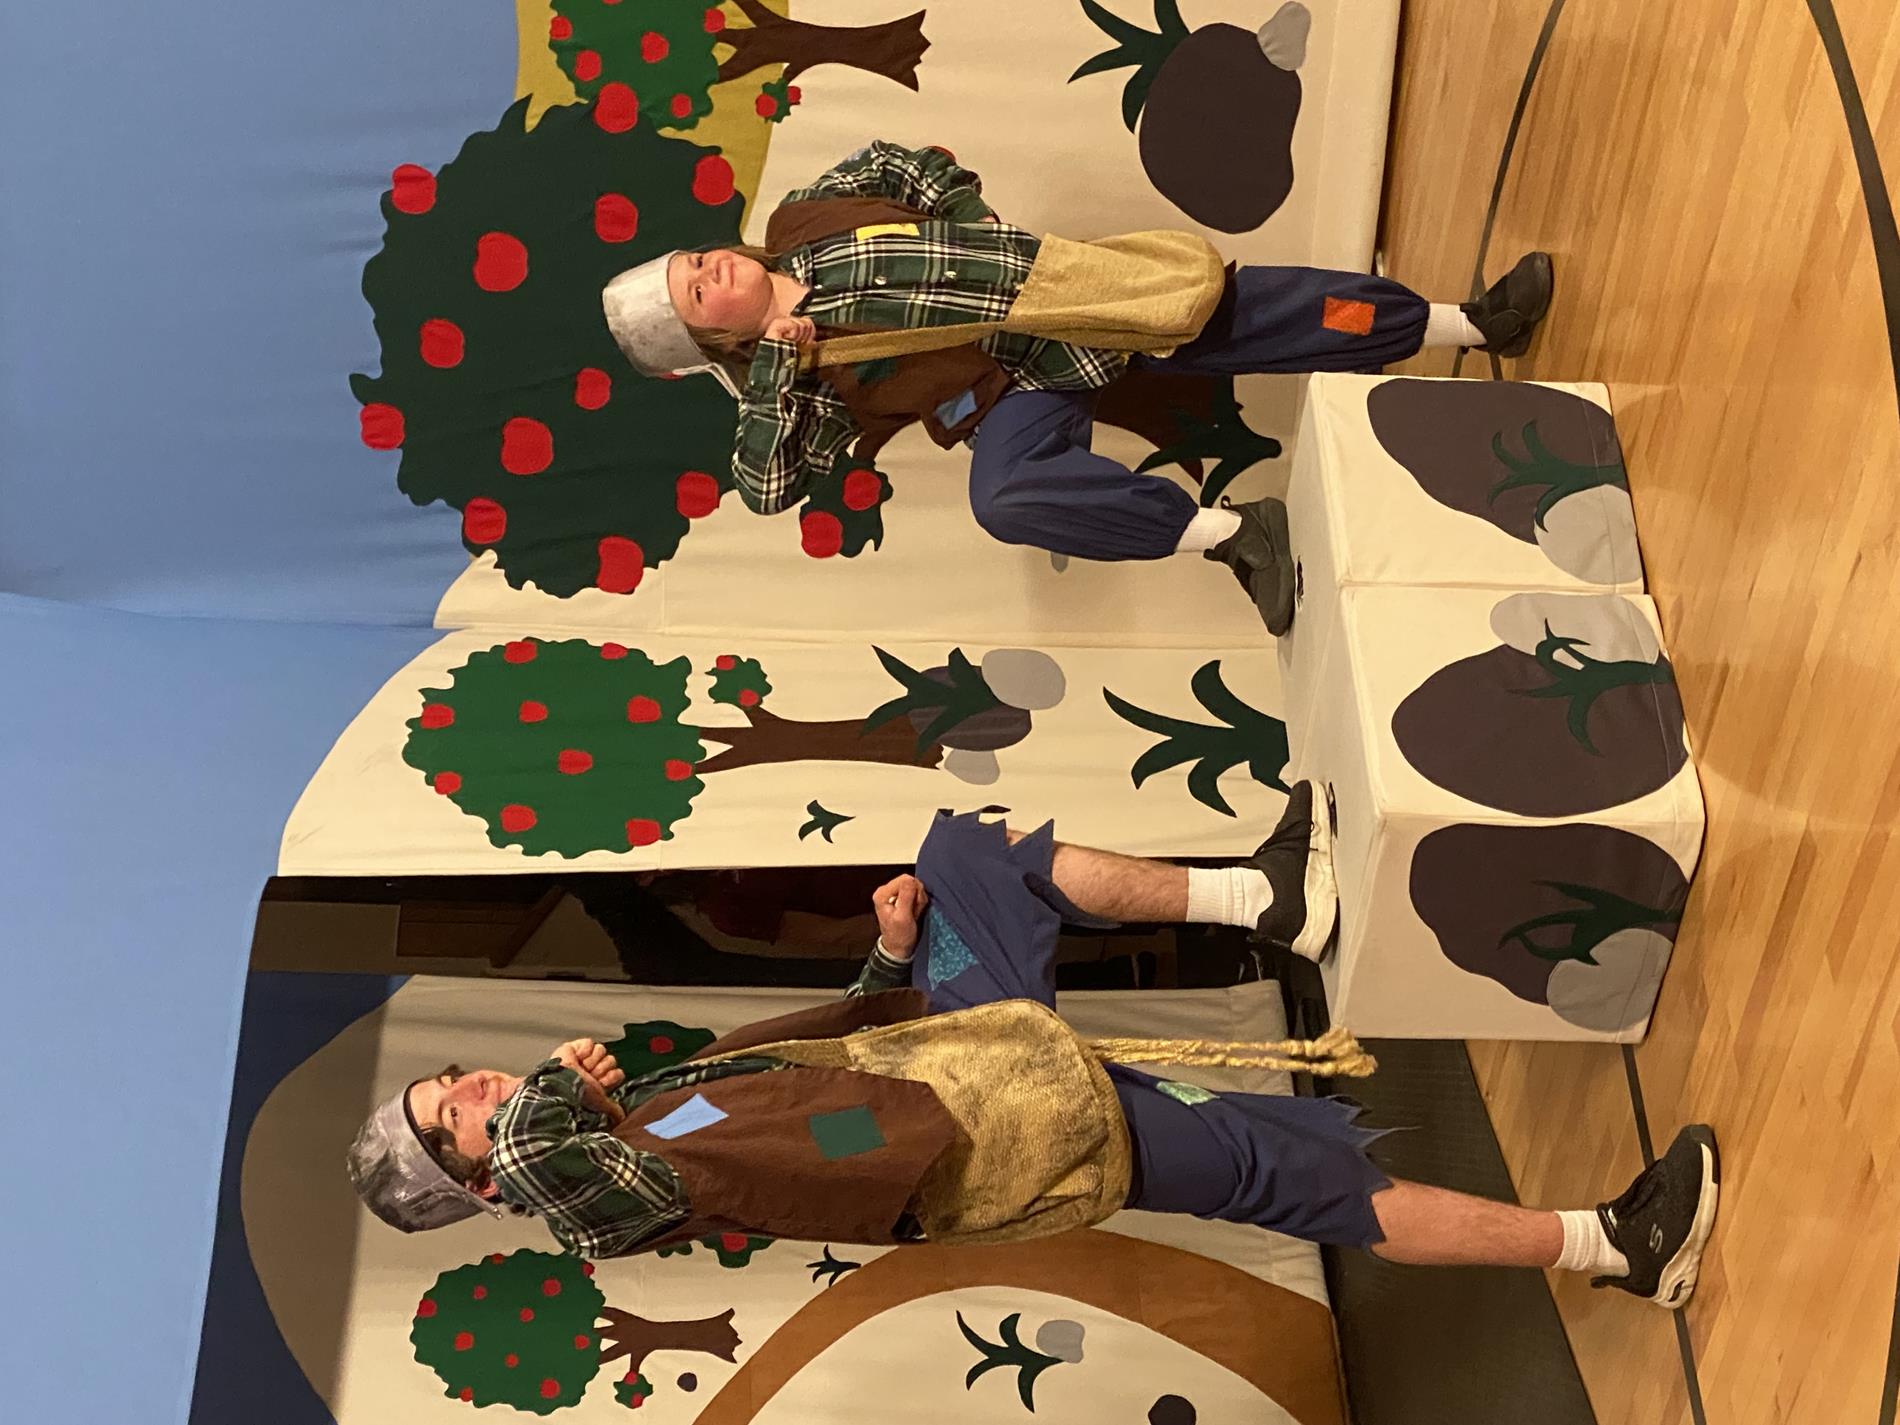 Students Putting on Johnny Appleseed Play